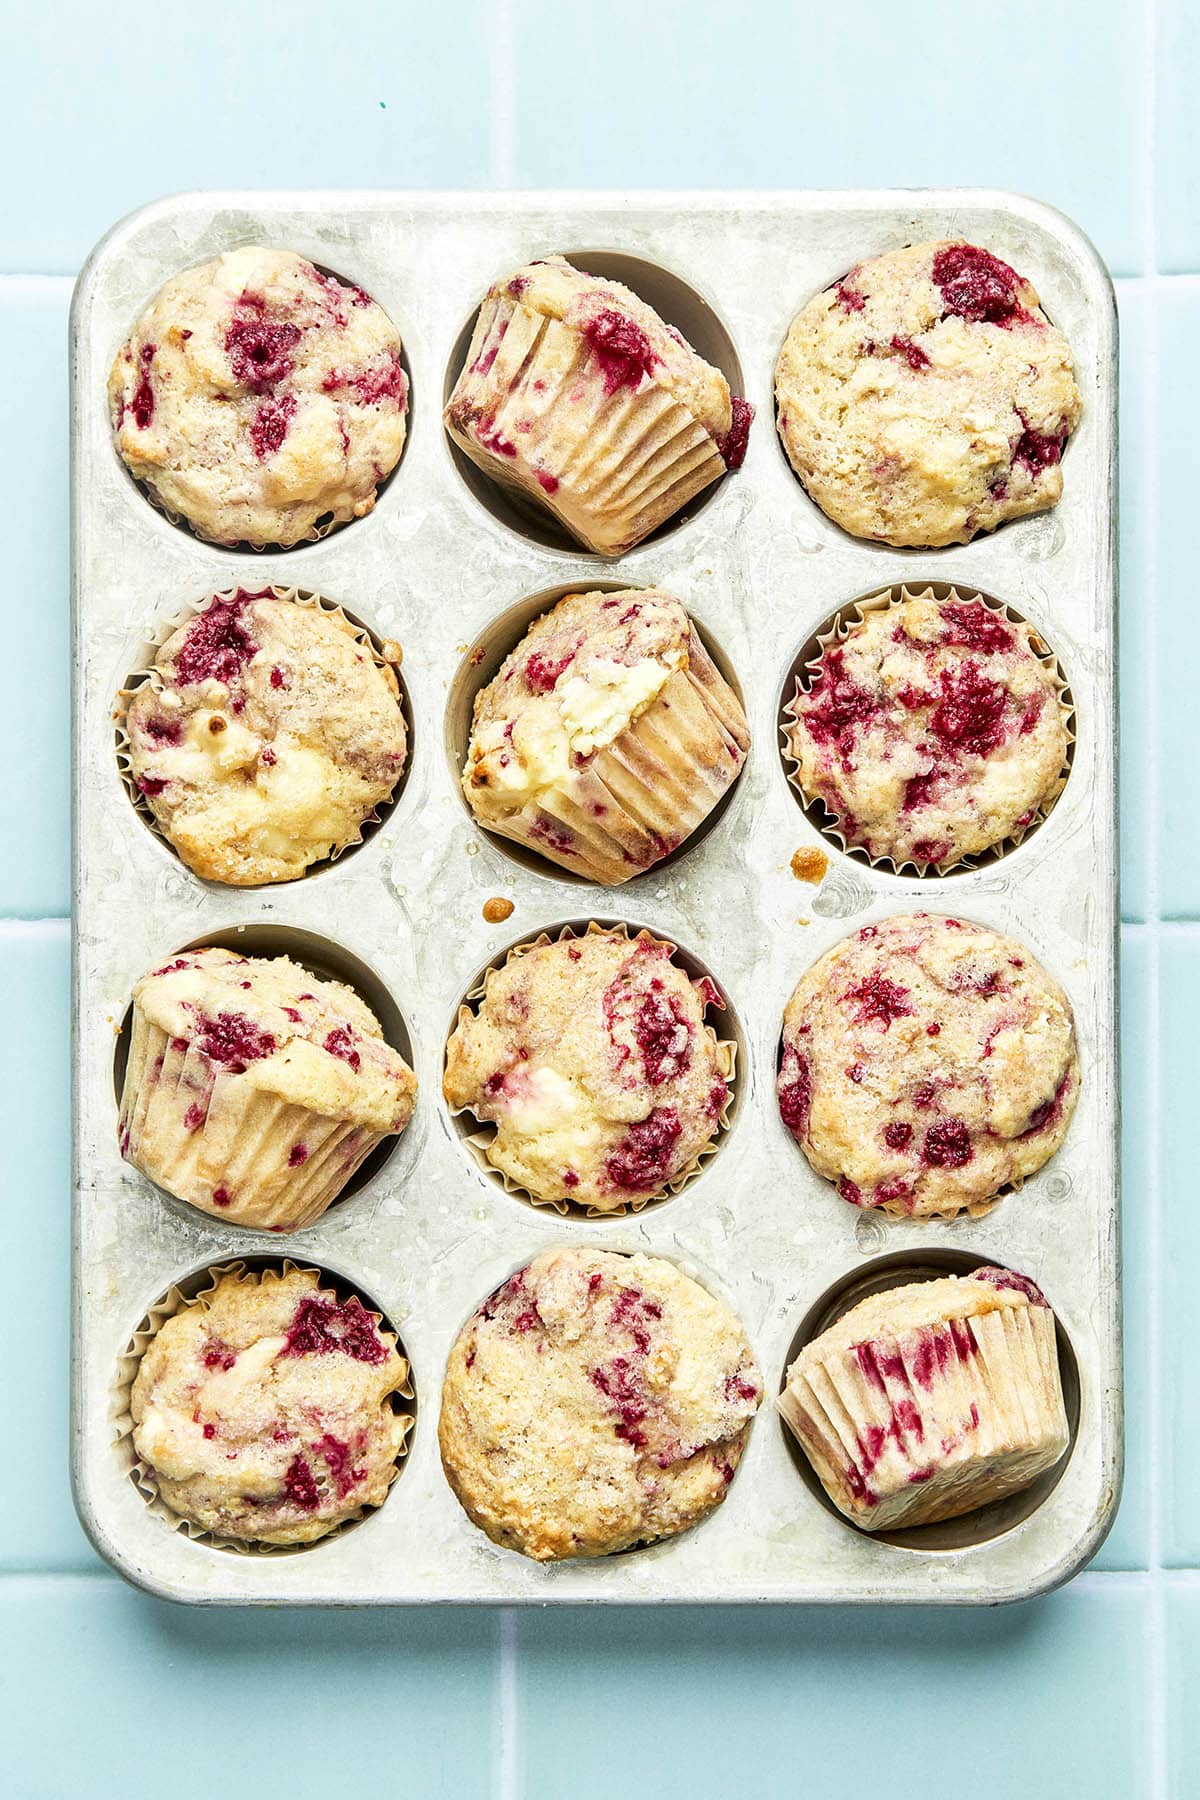 Baked muffins in a muffin tin with four of the muffins turned sideways to show the sides of each muffin.